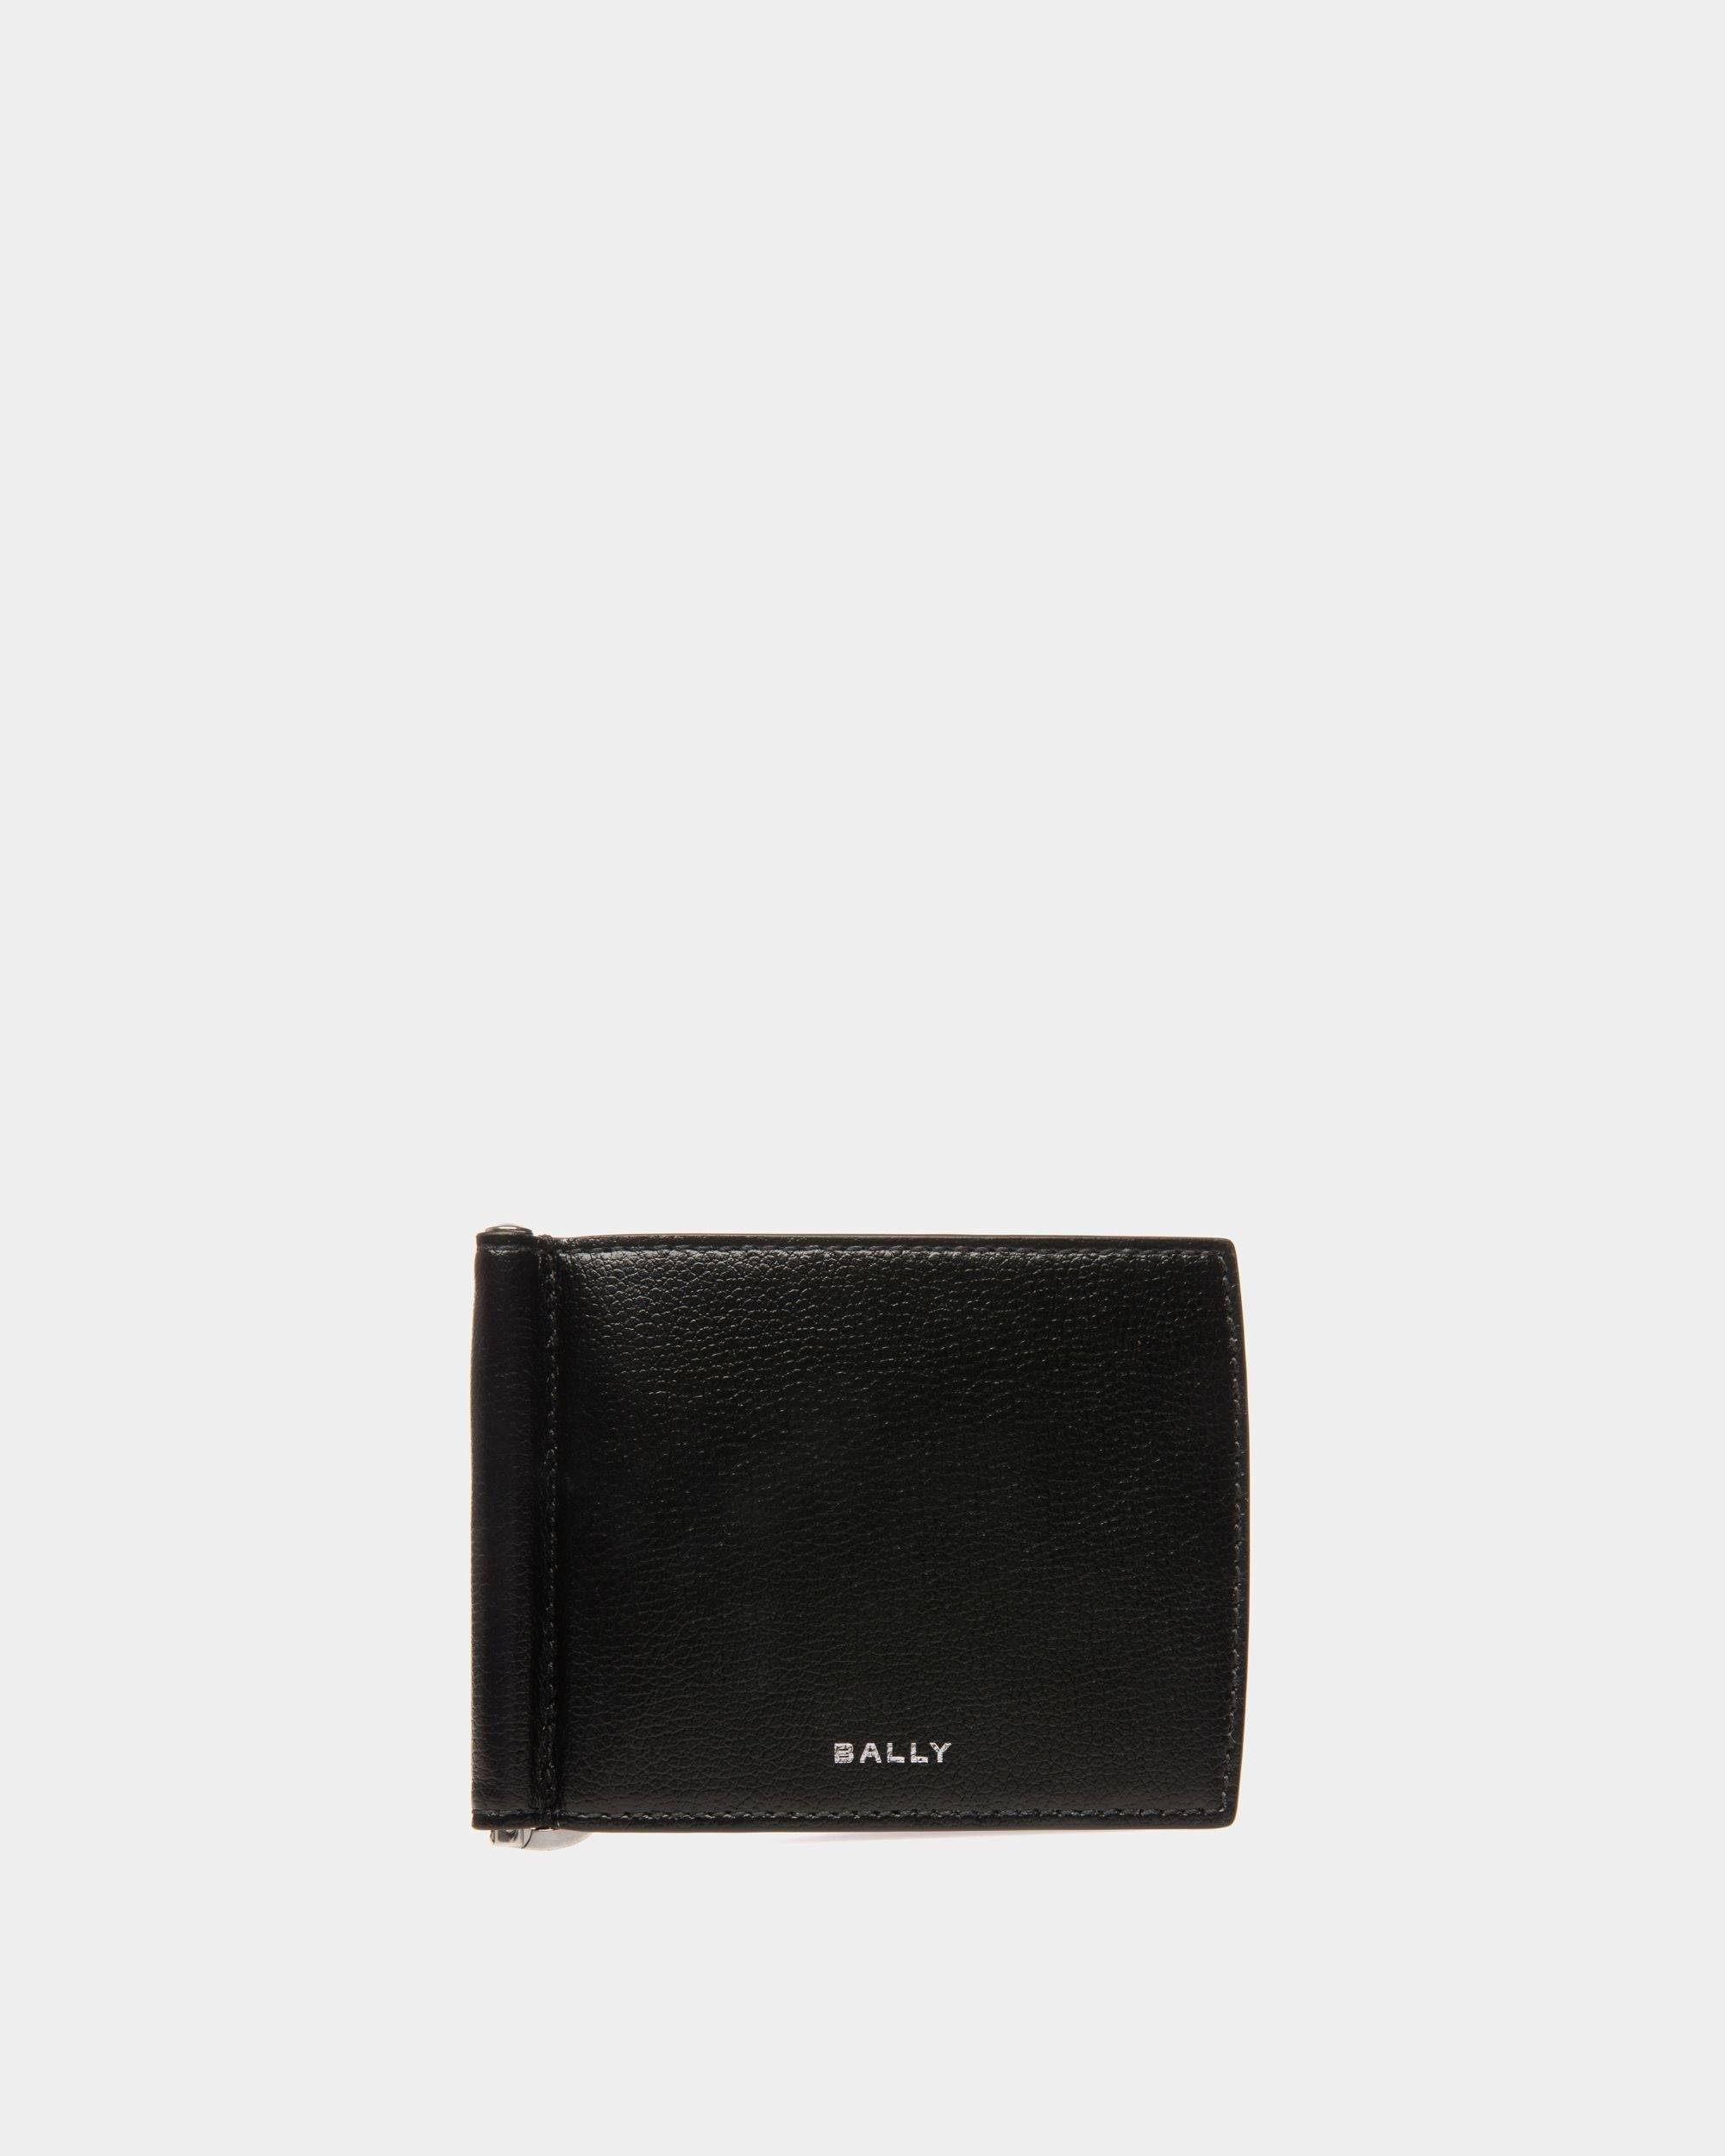 Banque Bi-fold Clip | Men's Wallets And Coin Purses | Black Leather | Bally | Still Life Front